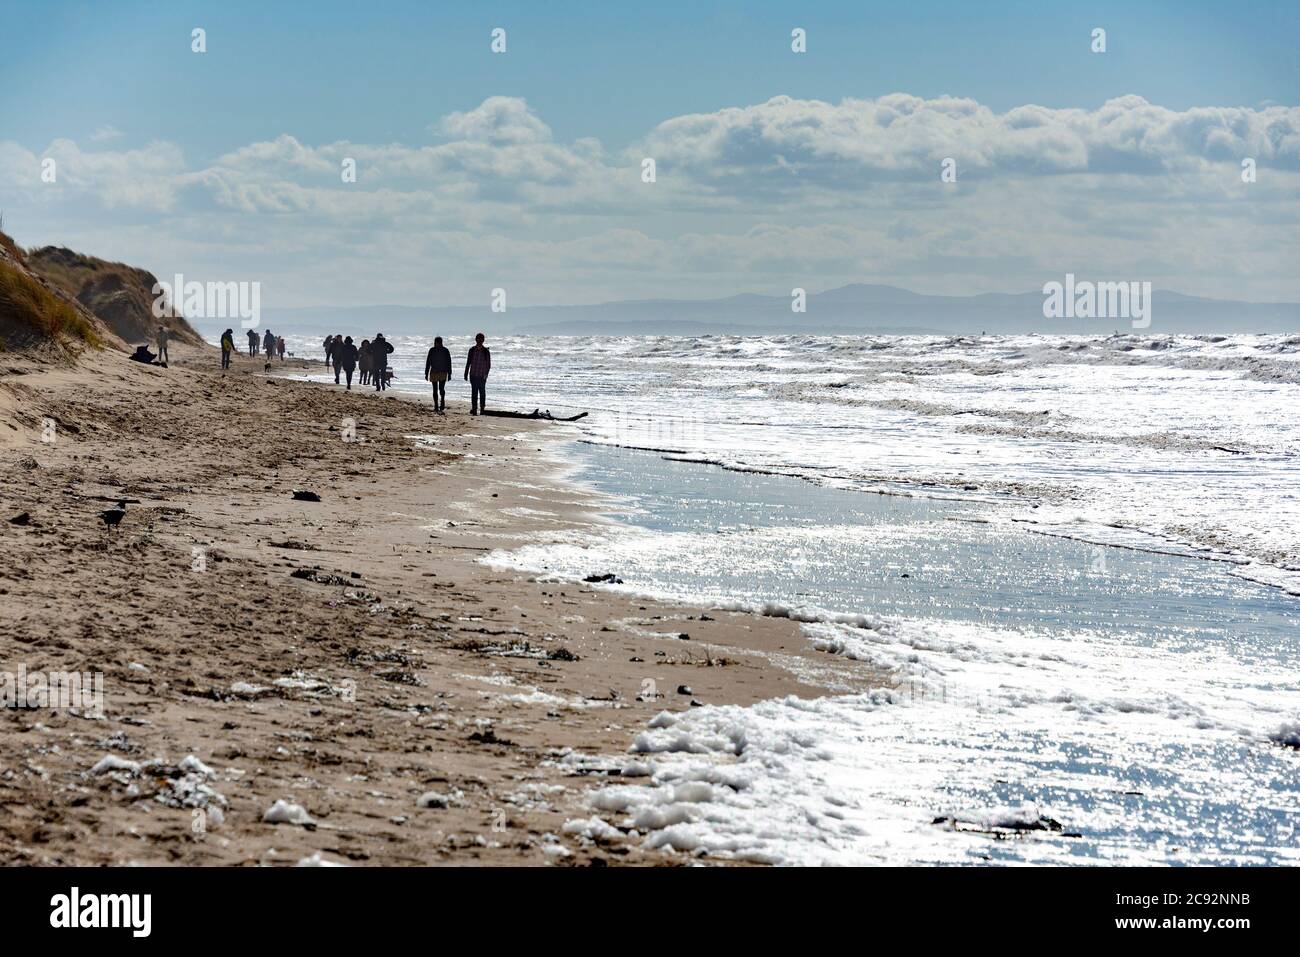 People silhouetted on Formby beach, Formby, Merseyside. Stock Photo